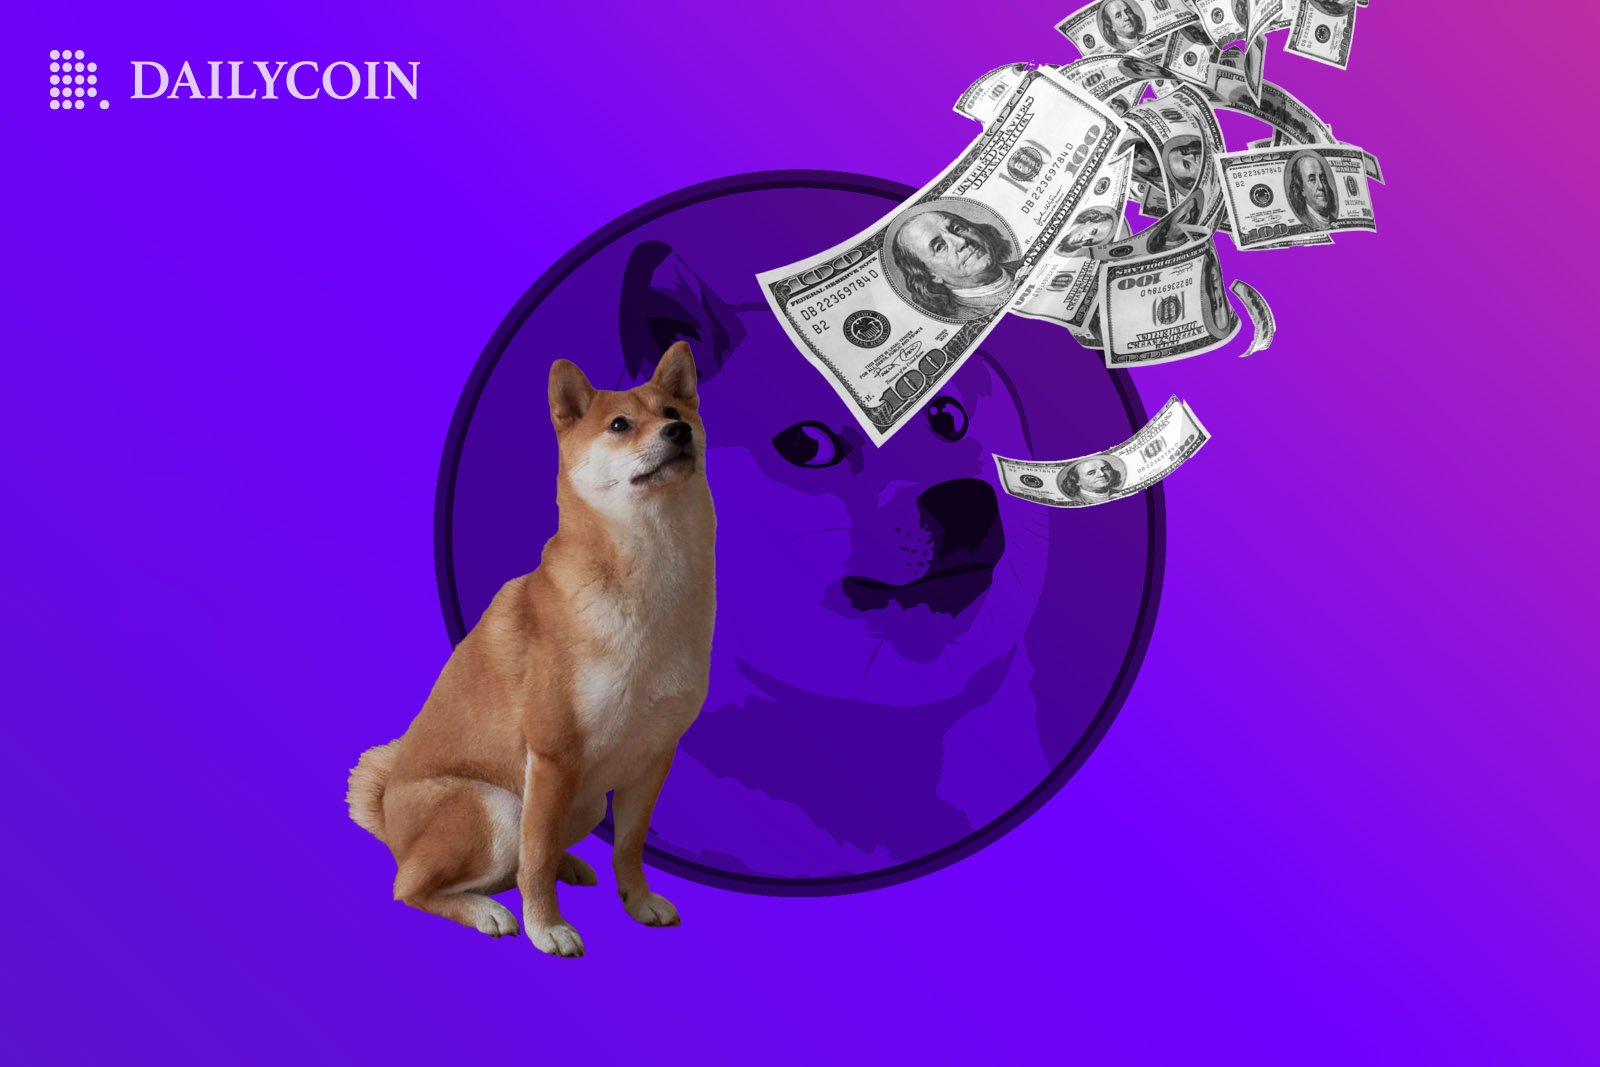 Revolut Launches Crypto Card With Cashback In Dogecoin (DOGE)